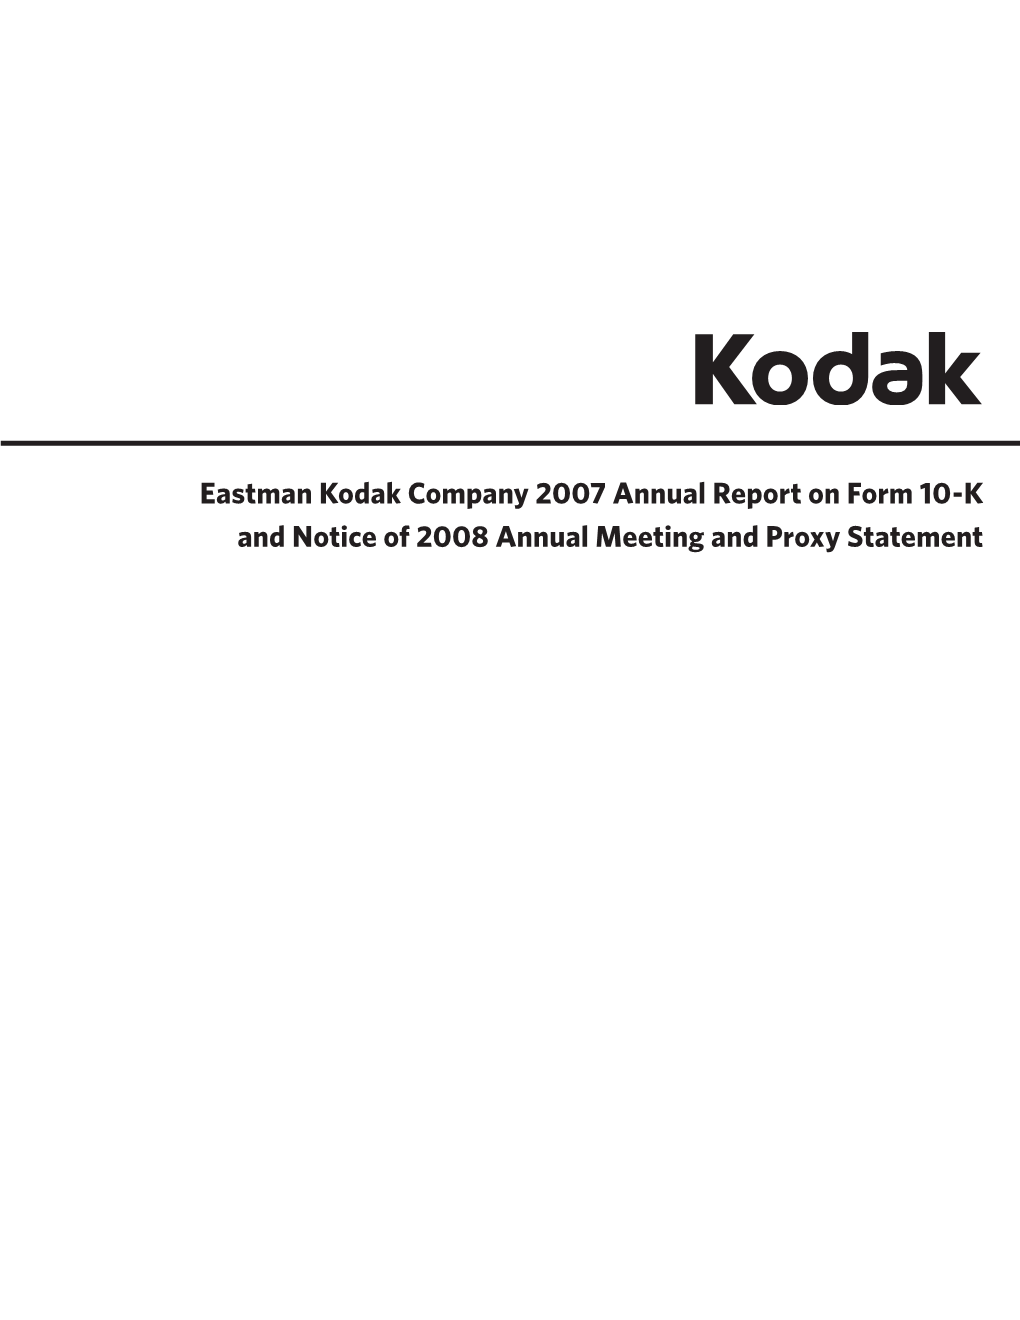 Eastman Kodak Company 2007 Annual Report on Form 10-K and Notice of 2008 Annual Meeting and Proxy Statement SECURITIES and EXCHANGE COMMISSION Washington, D.C